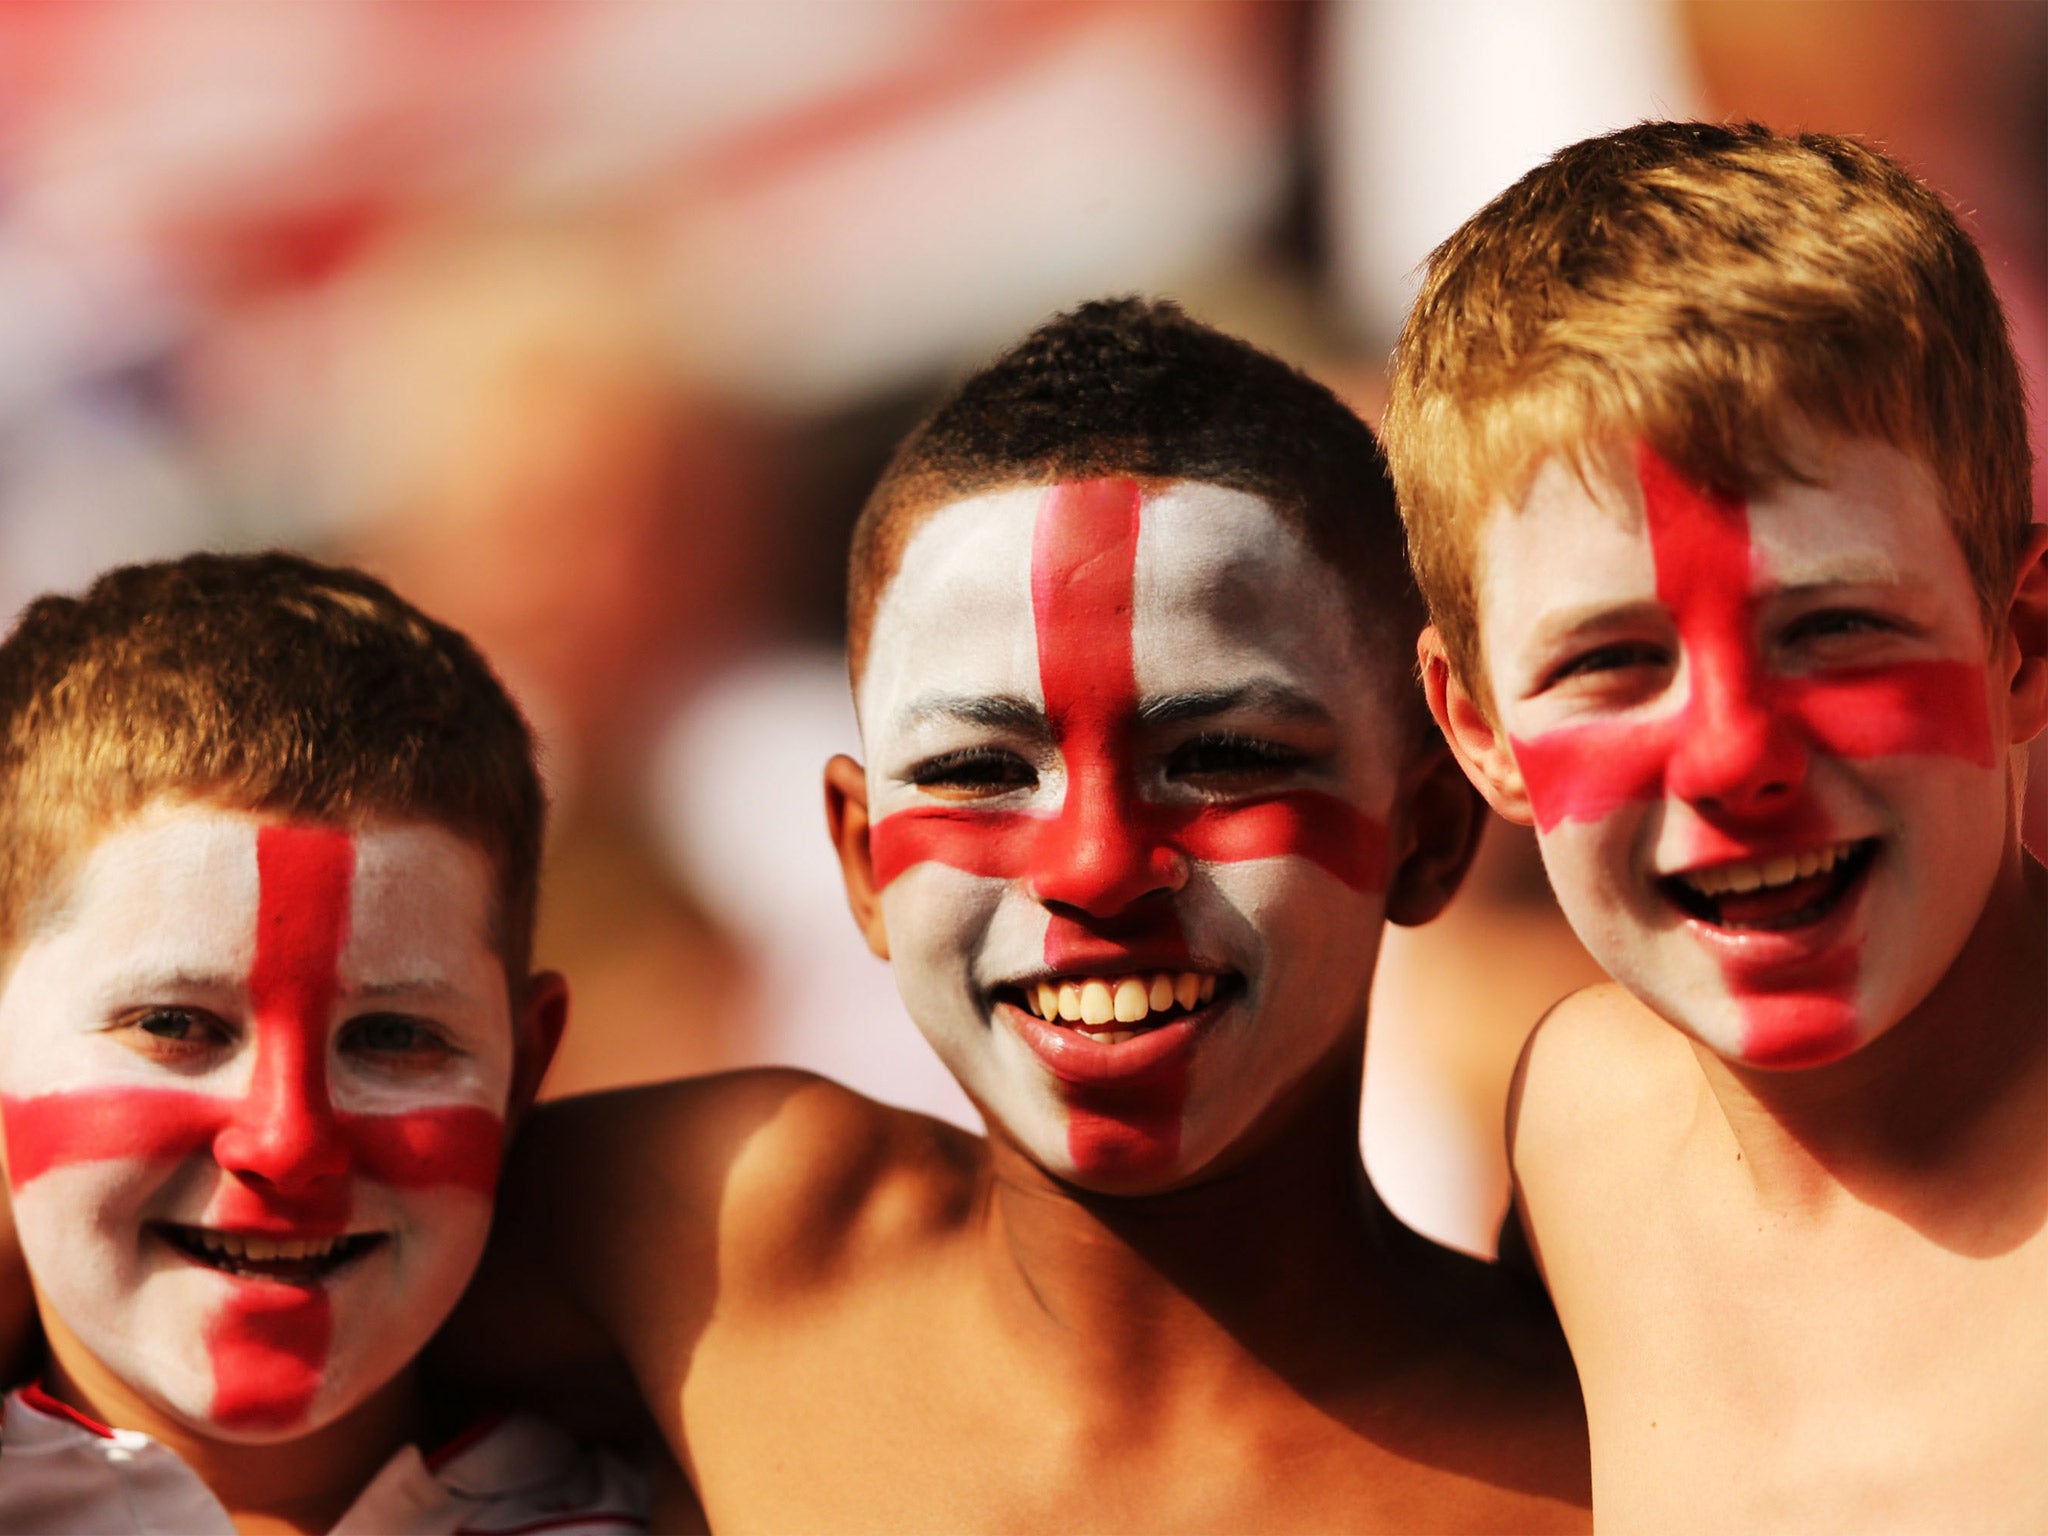 Team work: young England football supporters